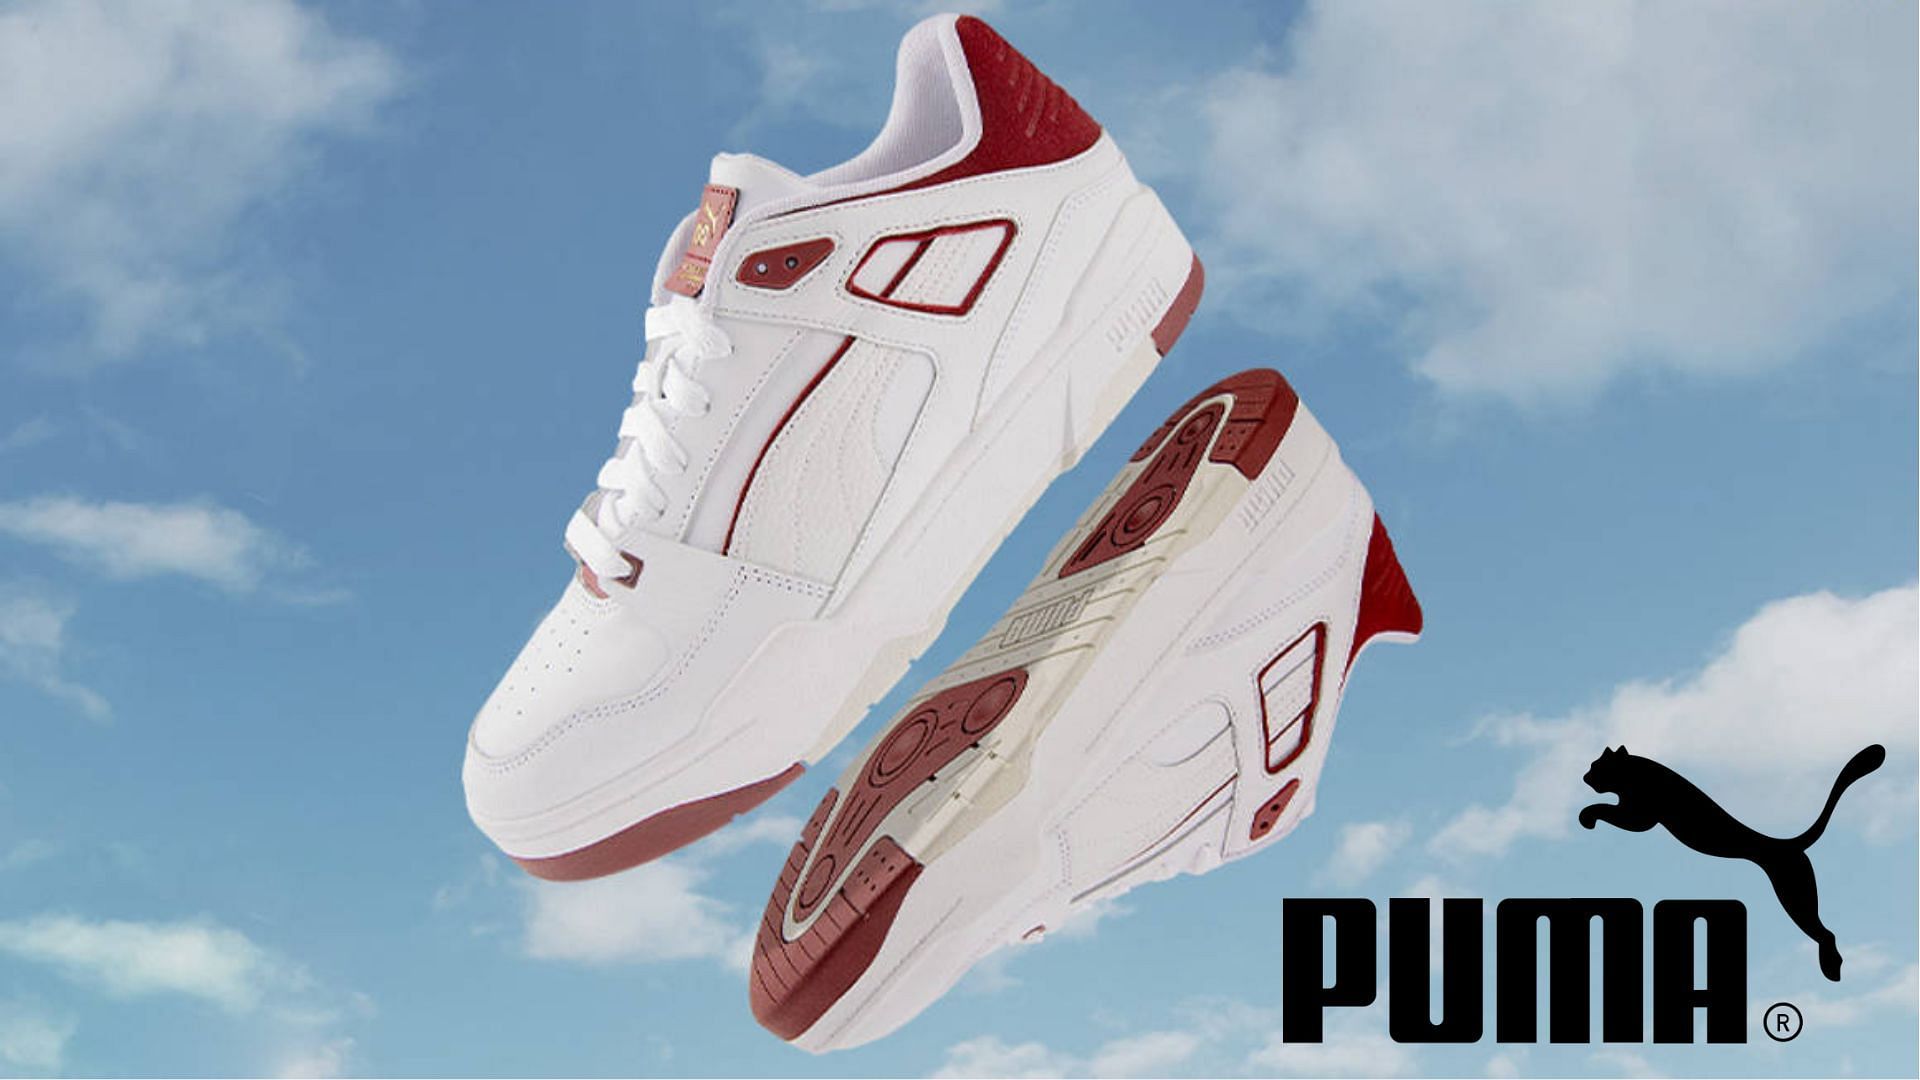 PUMA Slipstream footwear pack is now available for purchase (Image via PUMA)